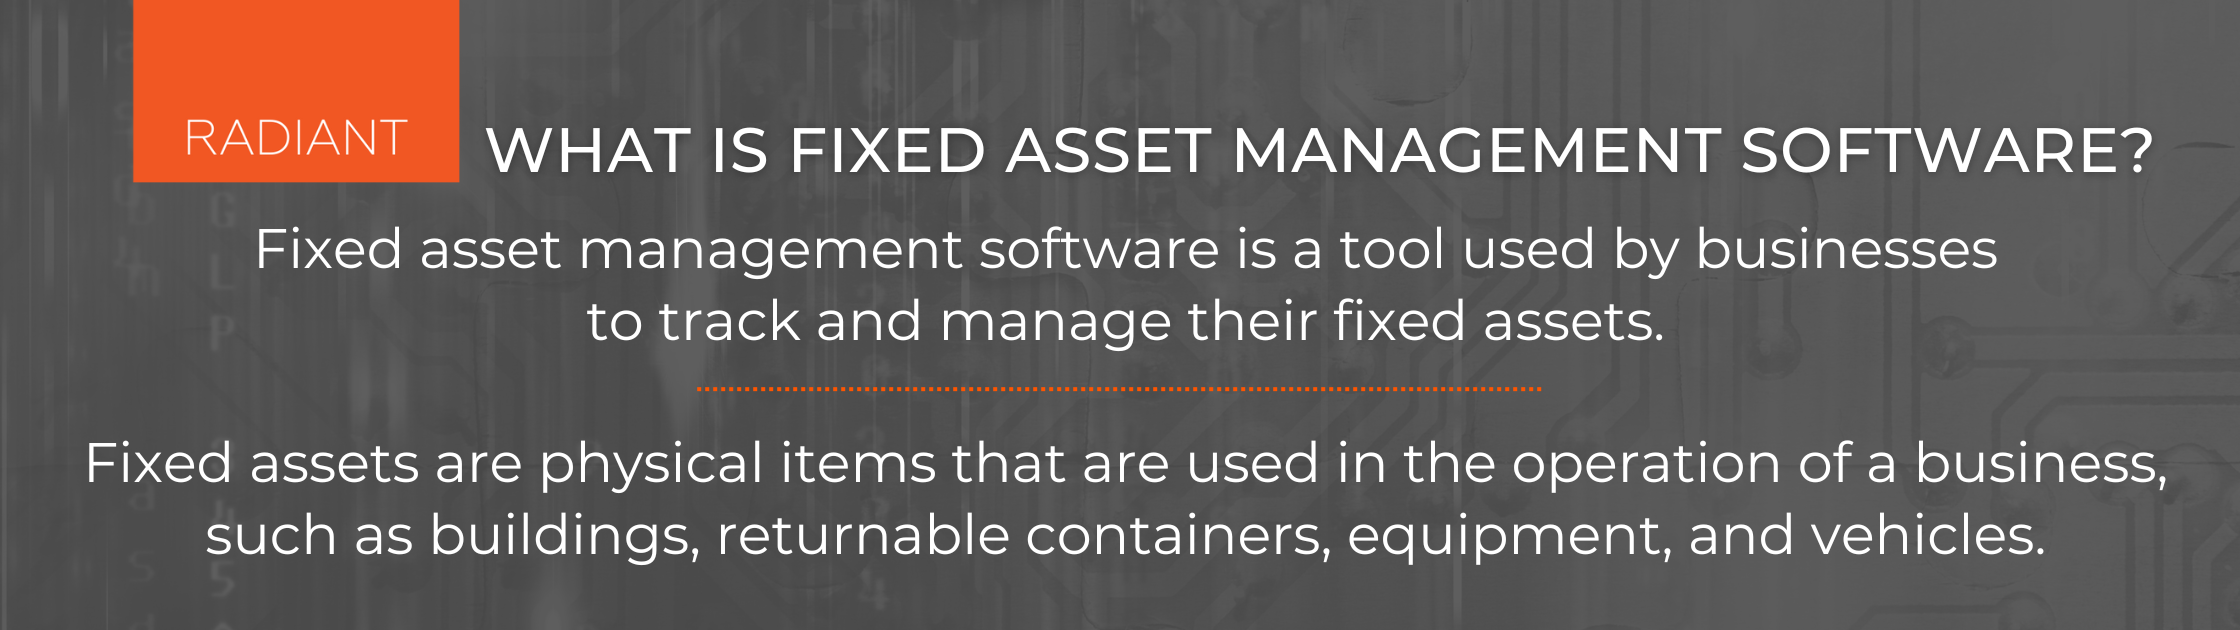 Fixed Asset Tracking Software - Physical Asset Management Software - Asset Management Platform - Fixed Asset Management Software - Asset Management Software - Asset Tracking Software - Asset Tracking Platform